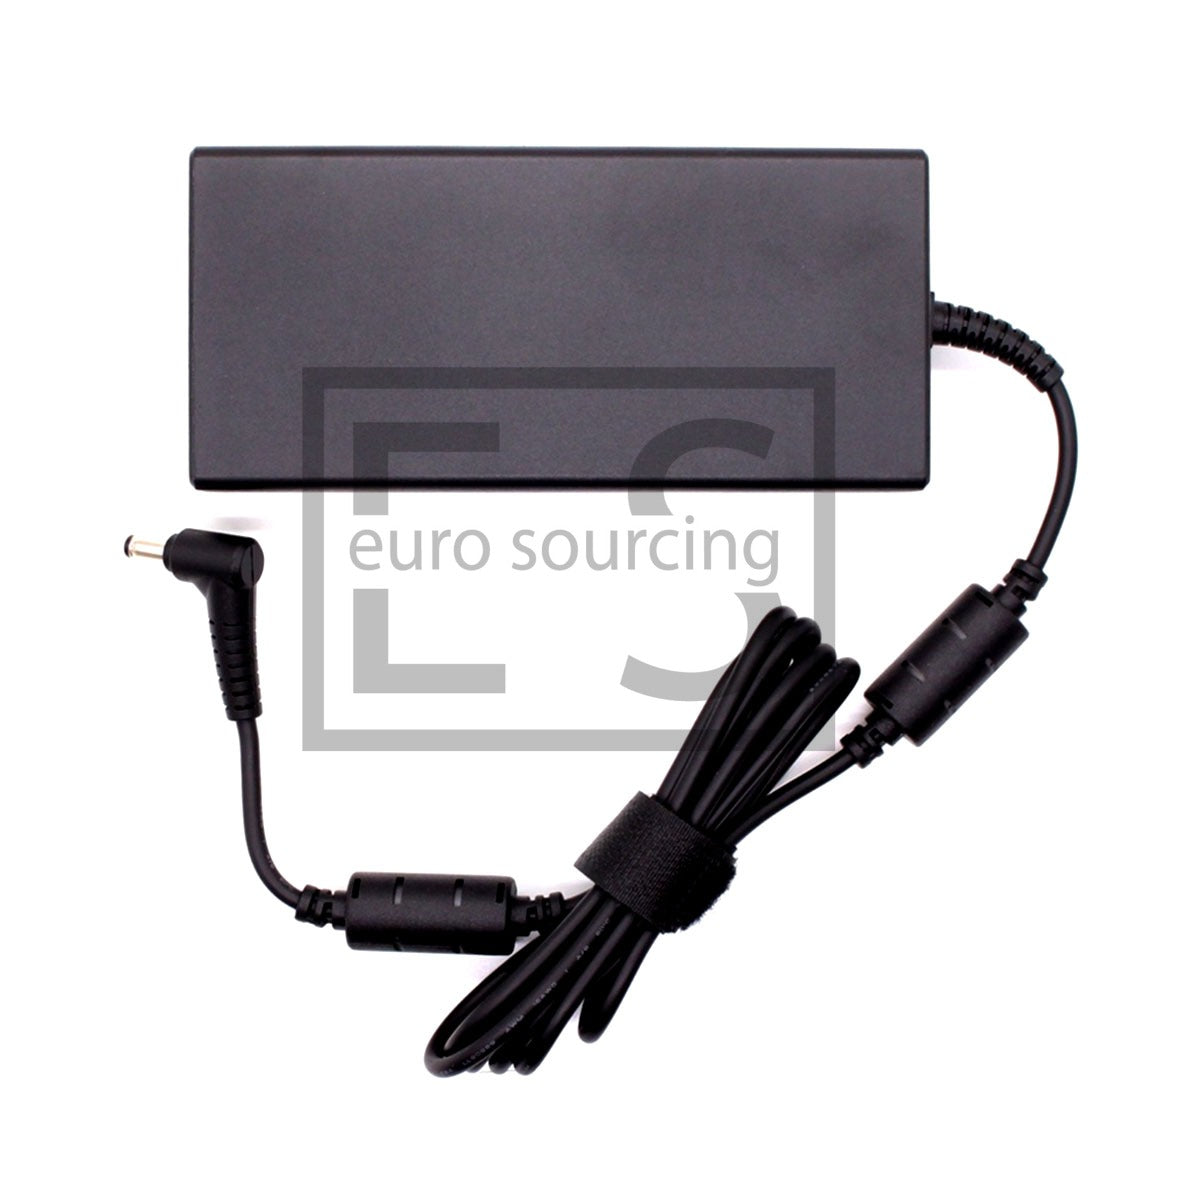 Genuine Delta 180W 19.5V 9.23A 5.5MM x 1.7MM Gaming Laptop Adapter Power Supply Compatible With ACER NITRO 5 AN515-41-1145